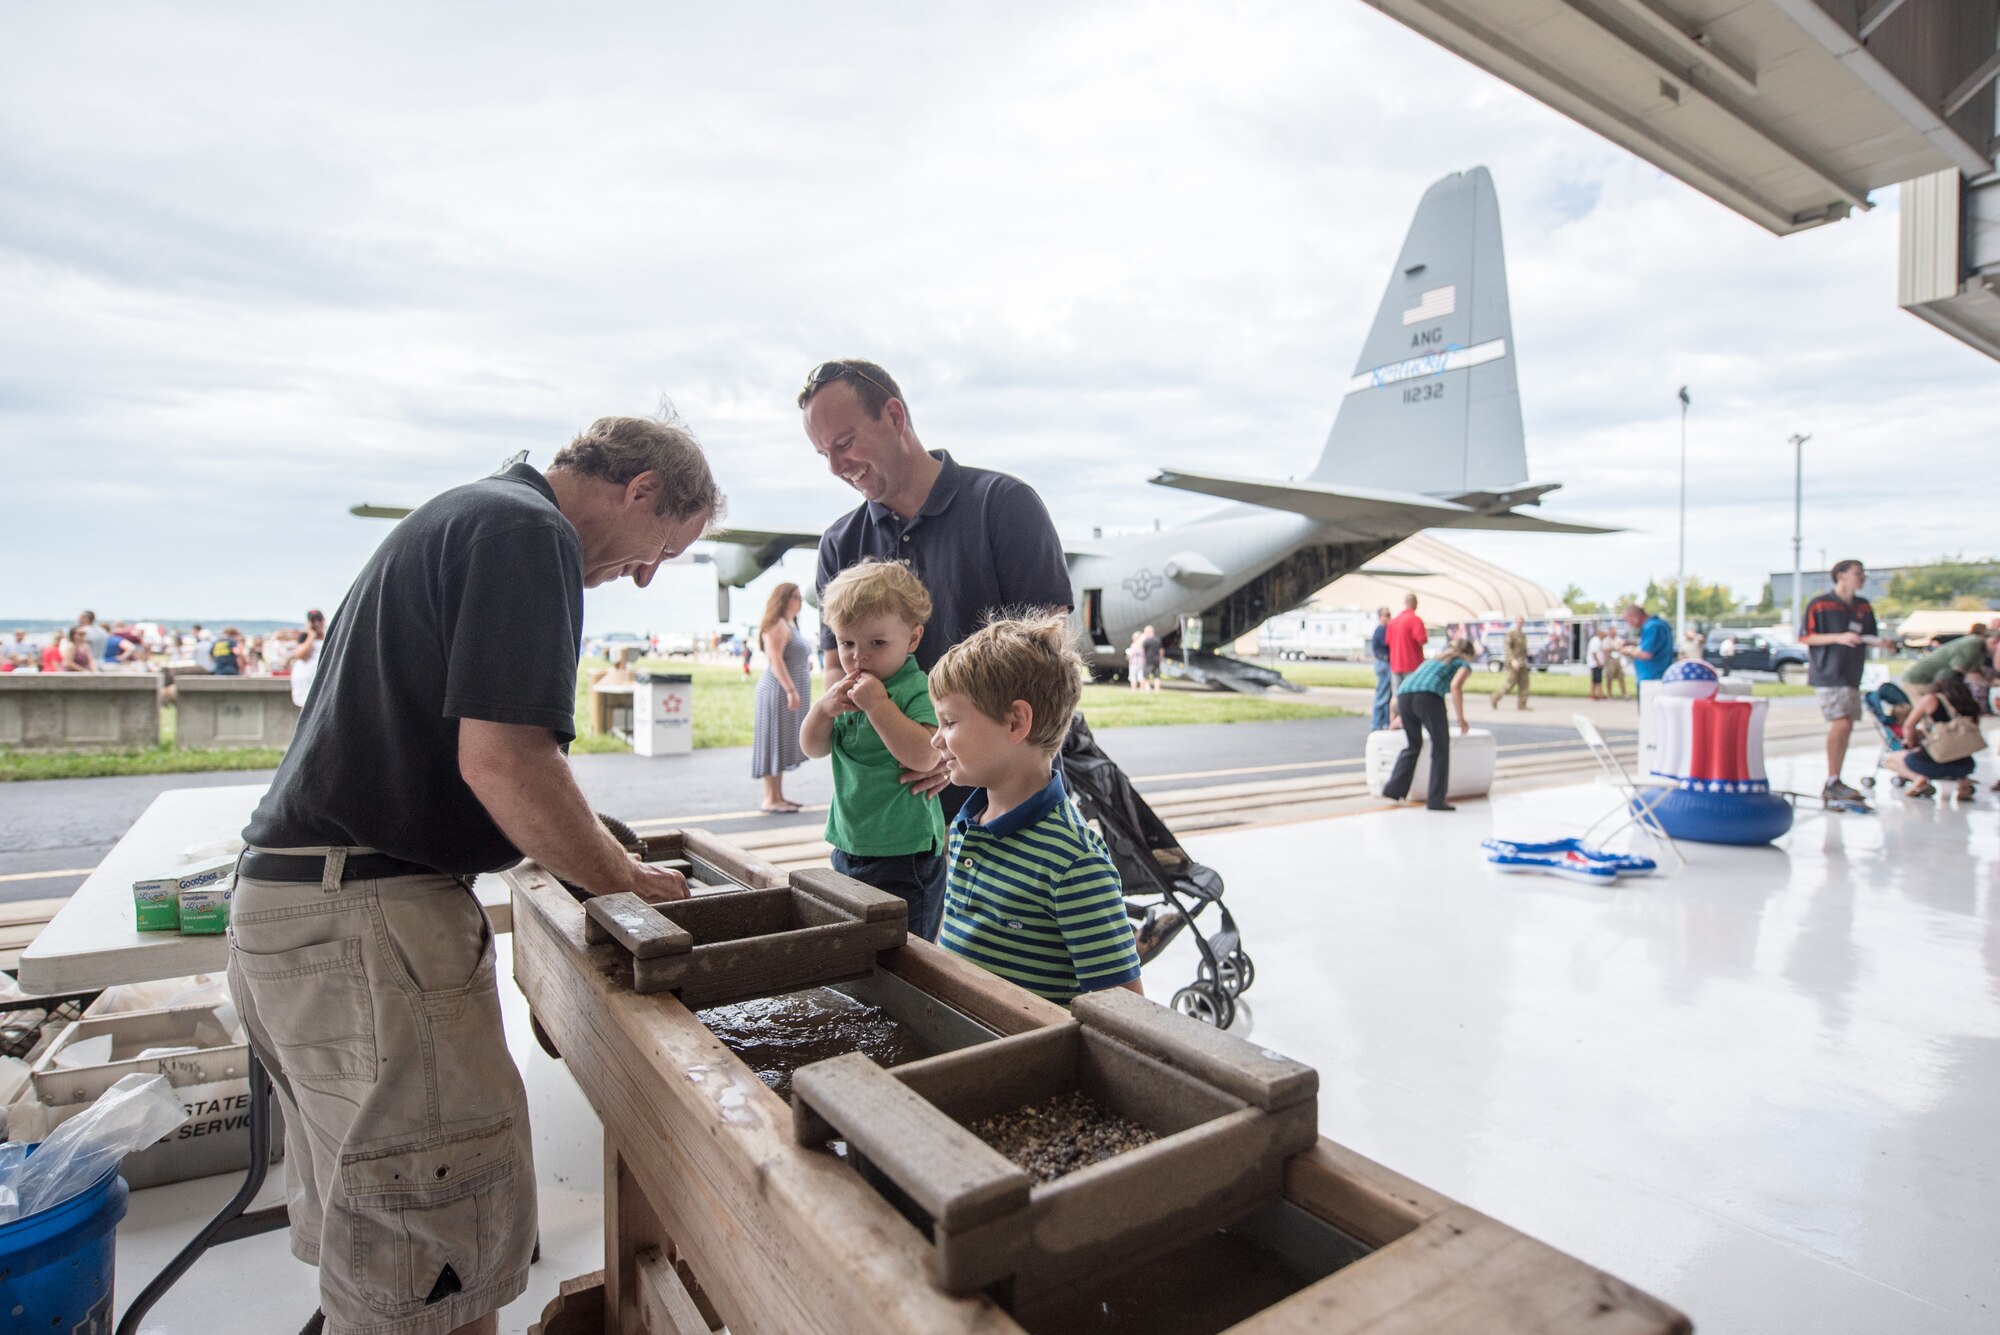 Lt. Col. Jason Schmidt (right), a pilot assigned to the 165th Airlift Squadron, and his sons participate in a rock-sifting demonstration during Family Day at the Kentucky Air National Guard Base in Louisville, Ky., Sept. 16, 2018. The event, which was sponsored by the Airman and Family Readiness Office and the Key Volunteer Group, featured a car show, a static-display C-130 Hercules aircraft and several other activities. (U.S. Air National Guard photo by Master Sgt. Phil Speck)